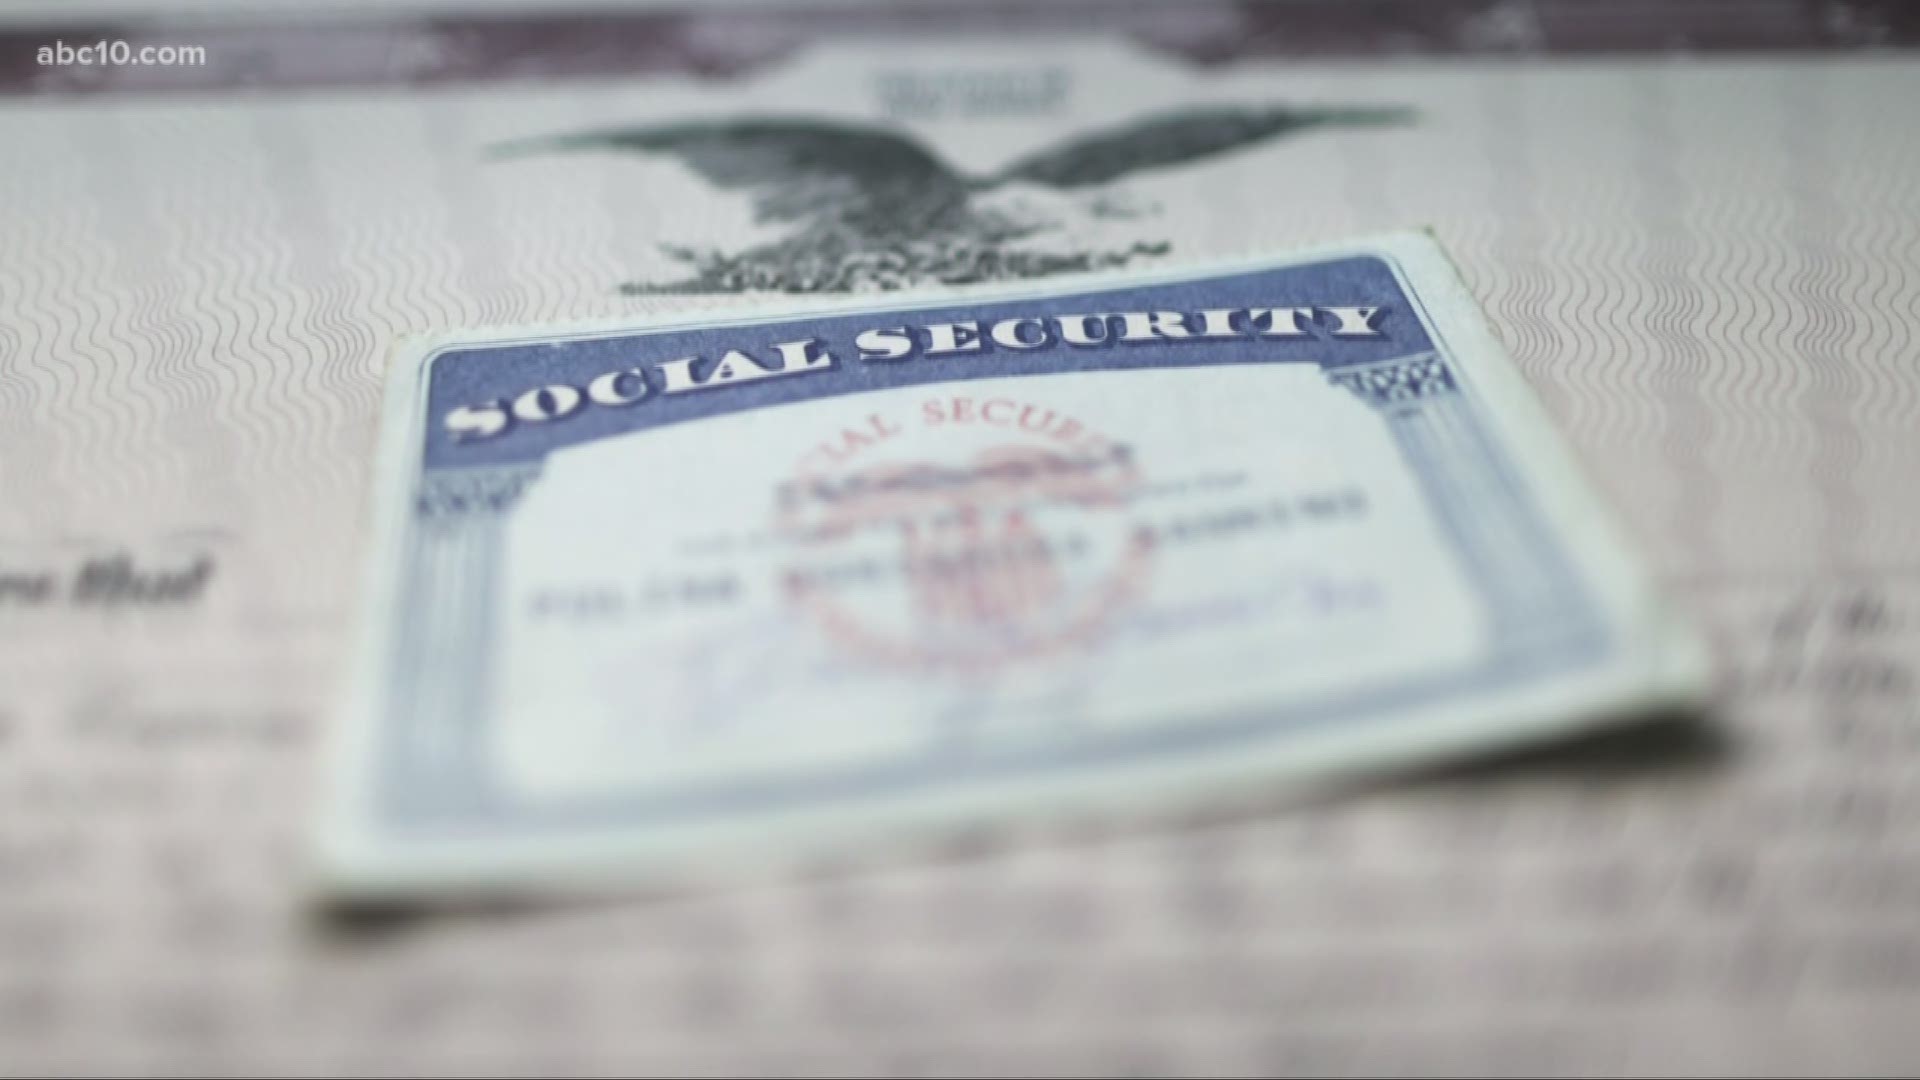 Do you have to give your social security number to hospitals? The verify team looks for answers.